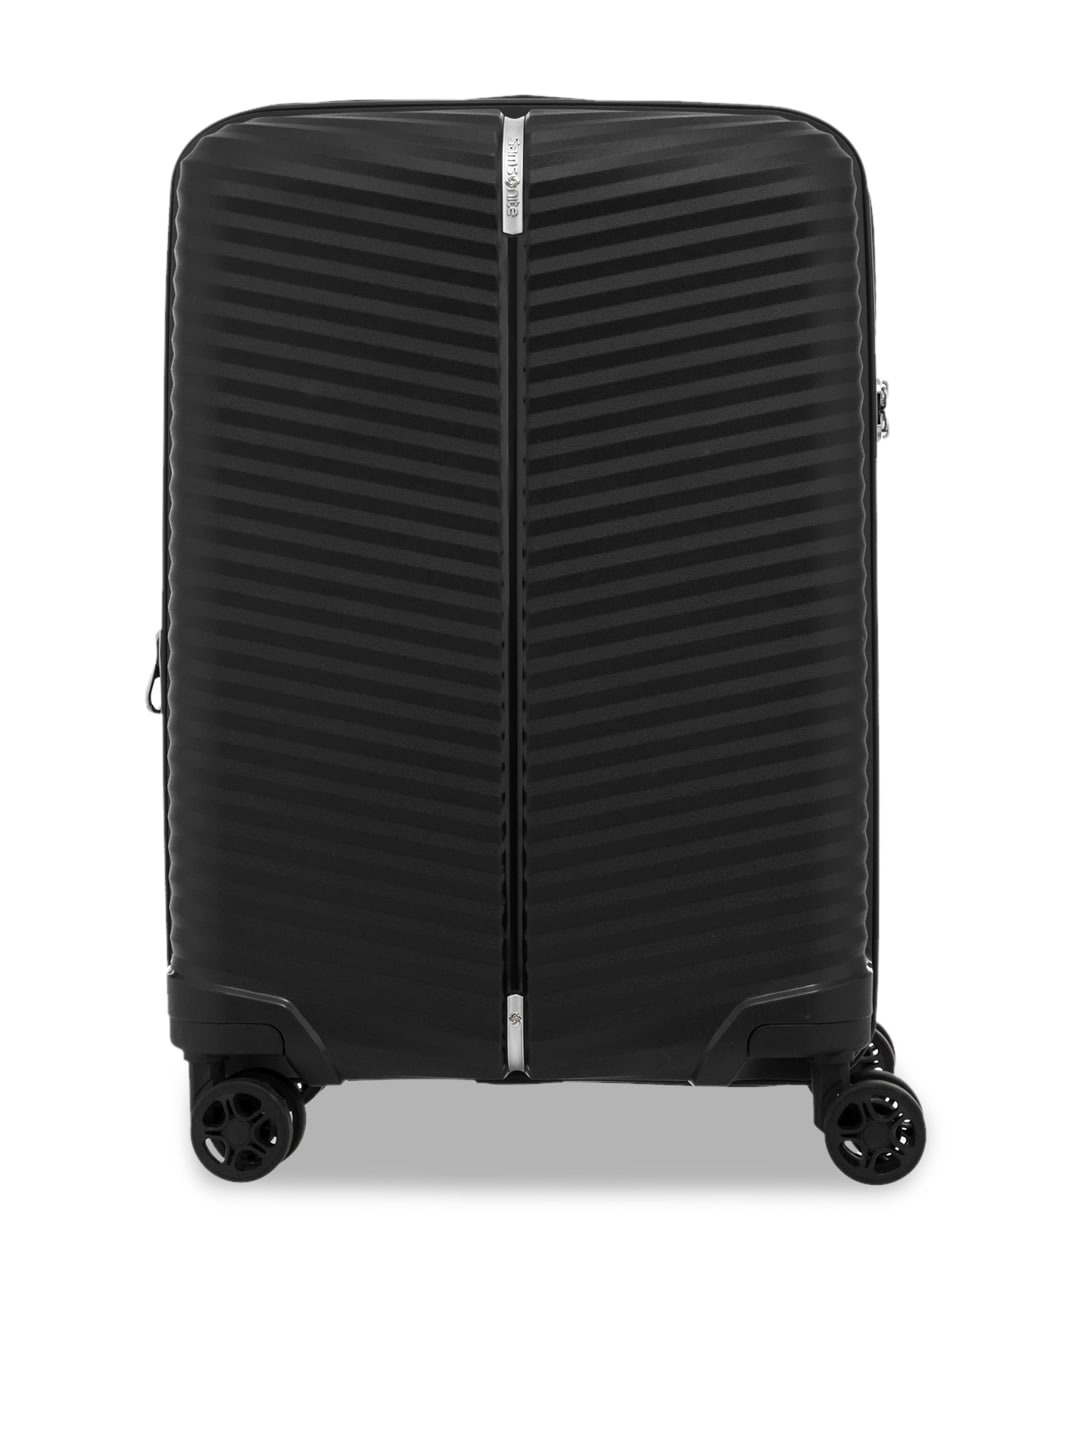 Samsonite Black Solid Hard-Sided Cabin Trolley Suitcase Price in India